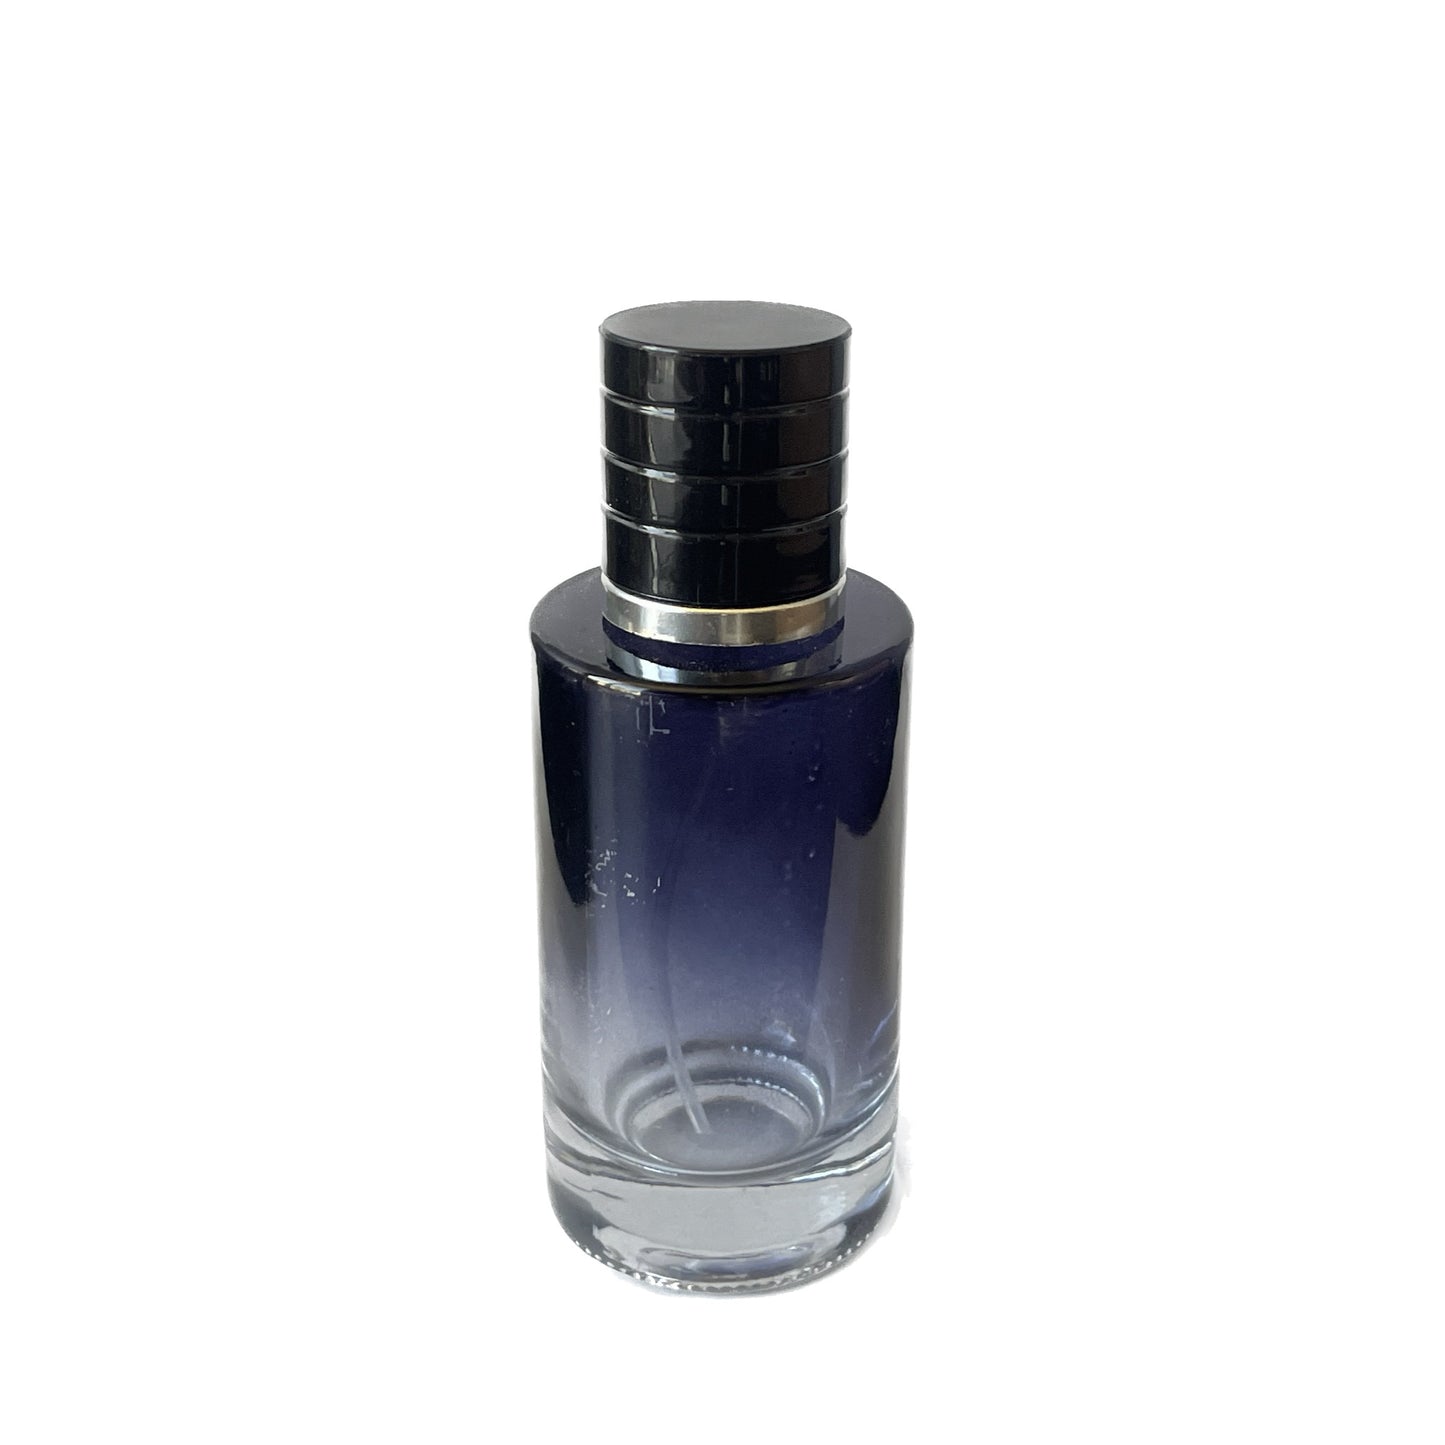 50 ml Black to Clear Gradient Glass Perfume Bottle with Silver Sprayer & Black Cap